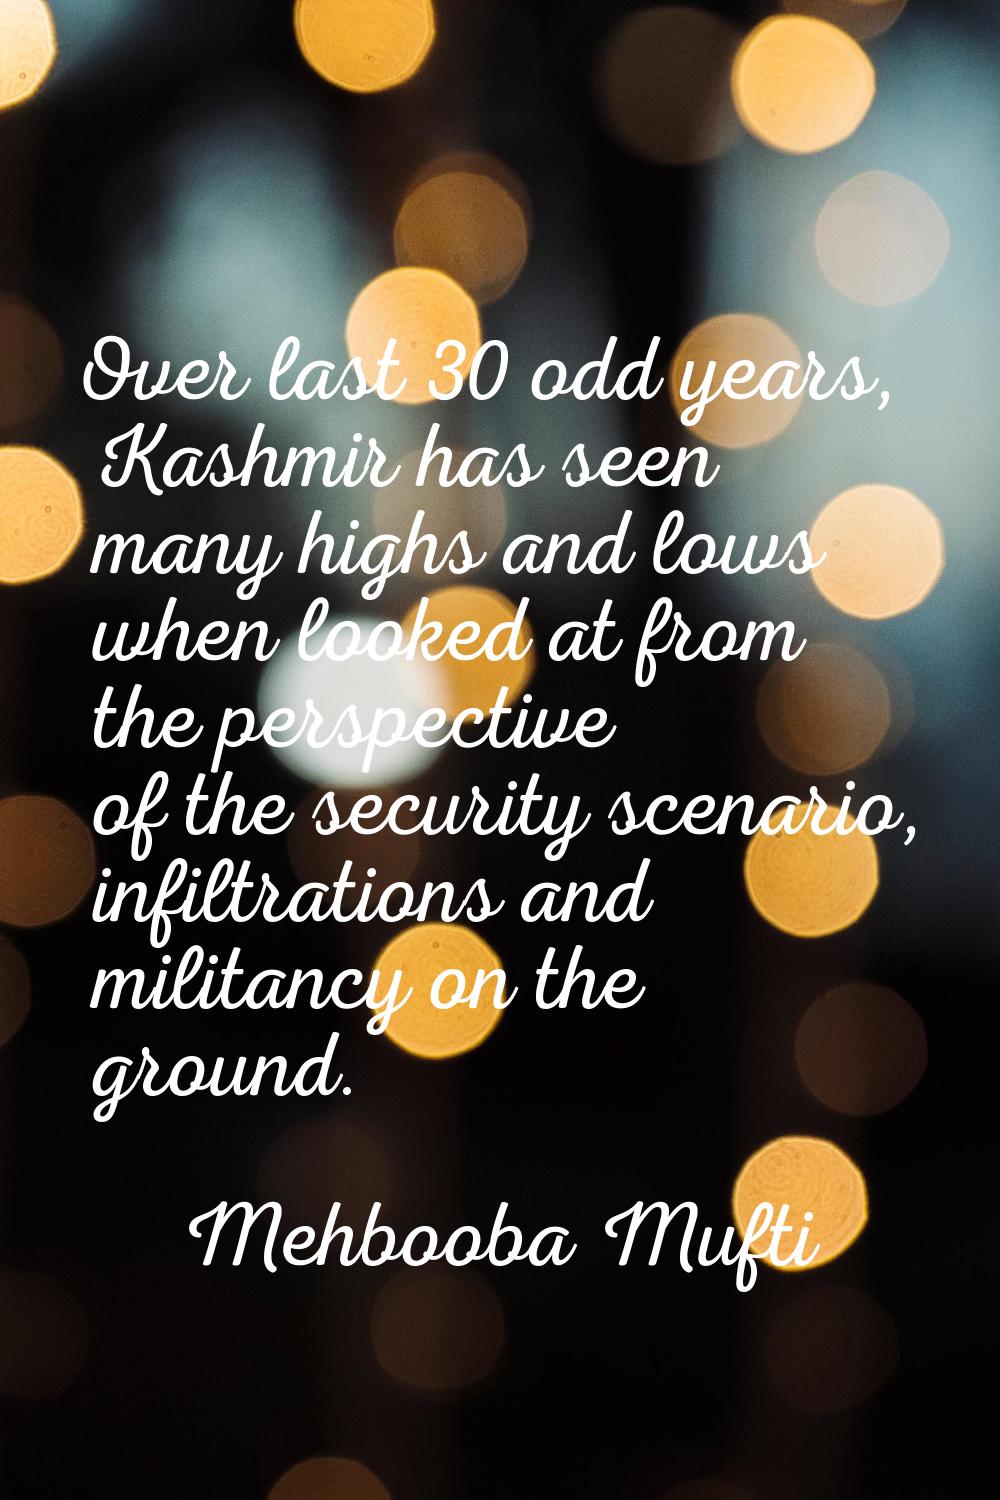 Over last 30 odd years, Kashmir has seen many highs and lows when looked at from the perspective of